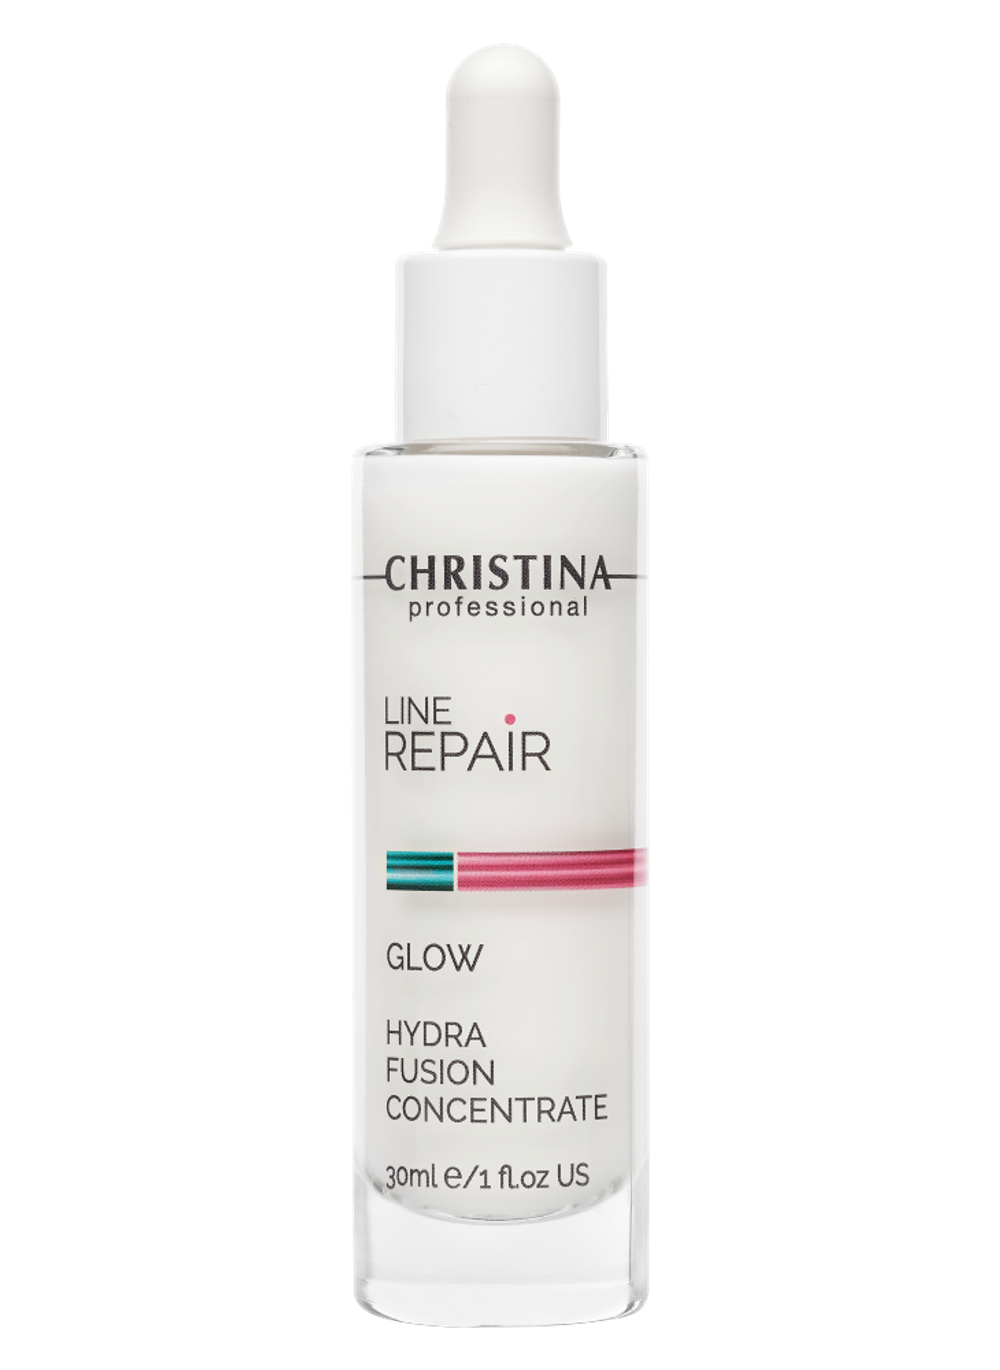 CHRISTINA Line Repair Glow Hydra Fusion Concentrate